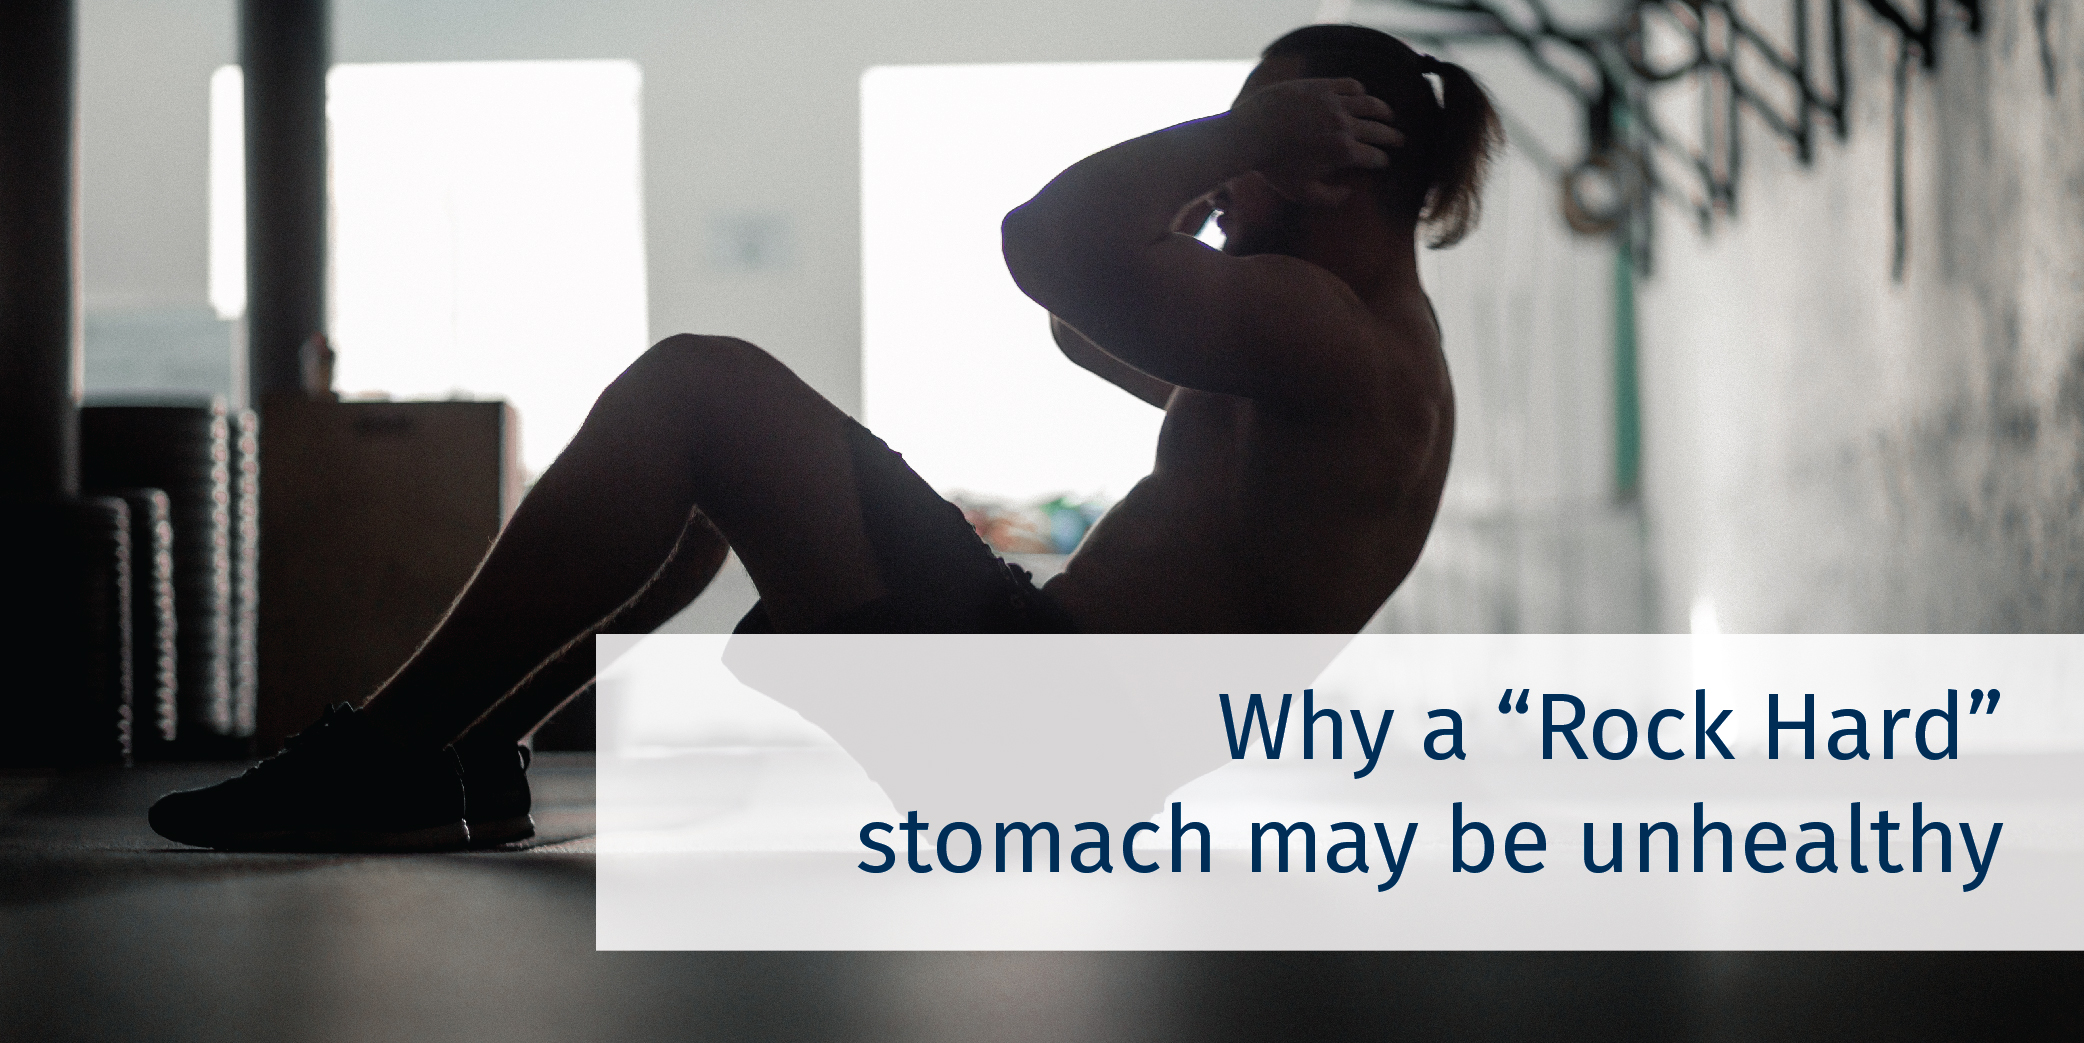 Why a “rock hard” stomach may be unhealthy